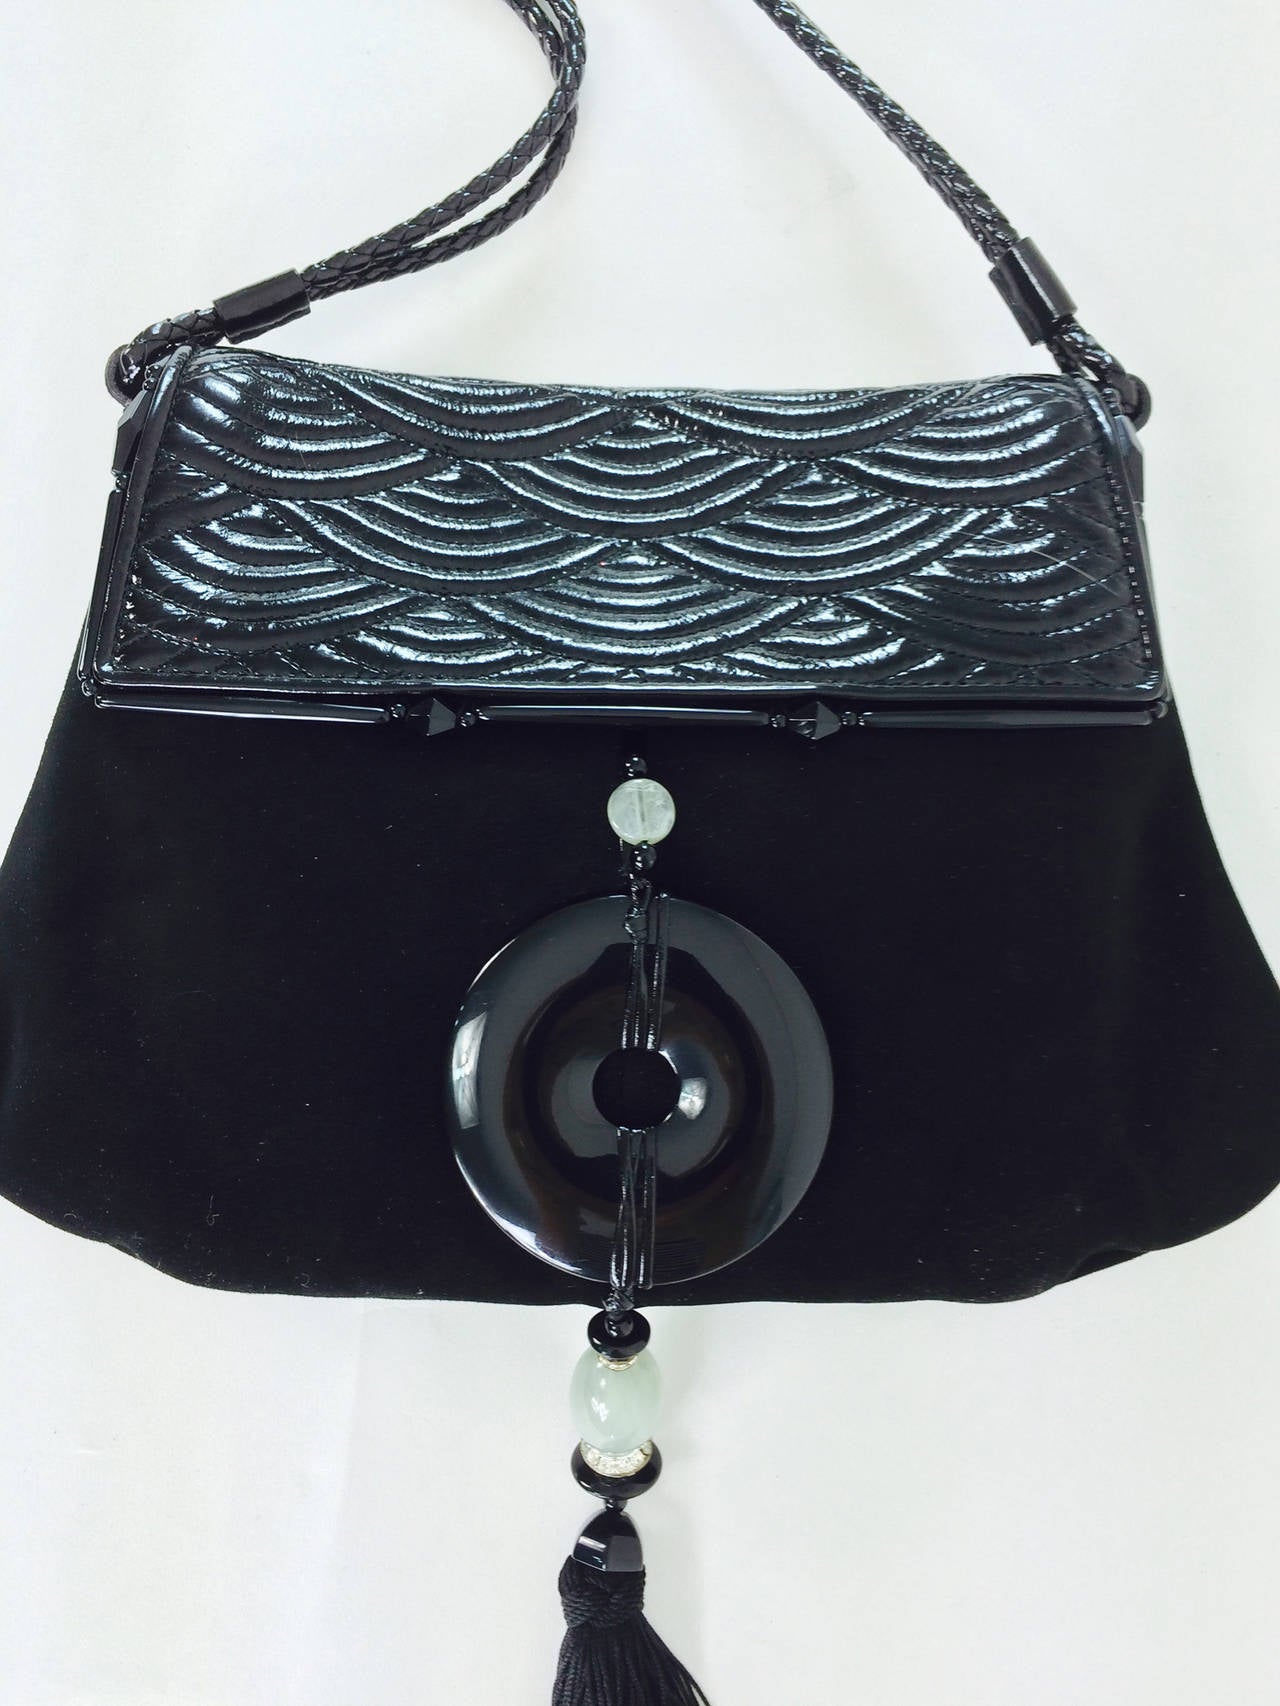 Yves St Laurent RIve gauche black Chinoiserie evening handbag...Black suede bag has a patent leather top flap with 